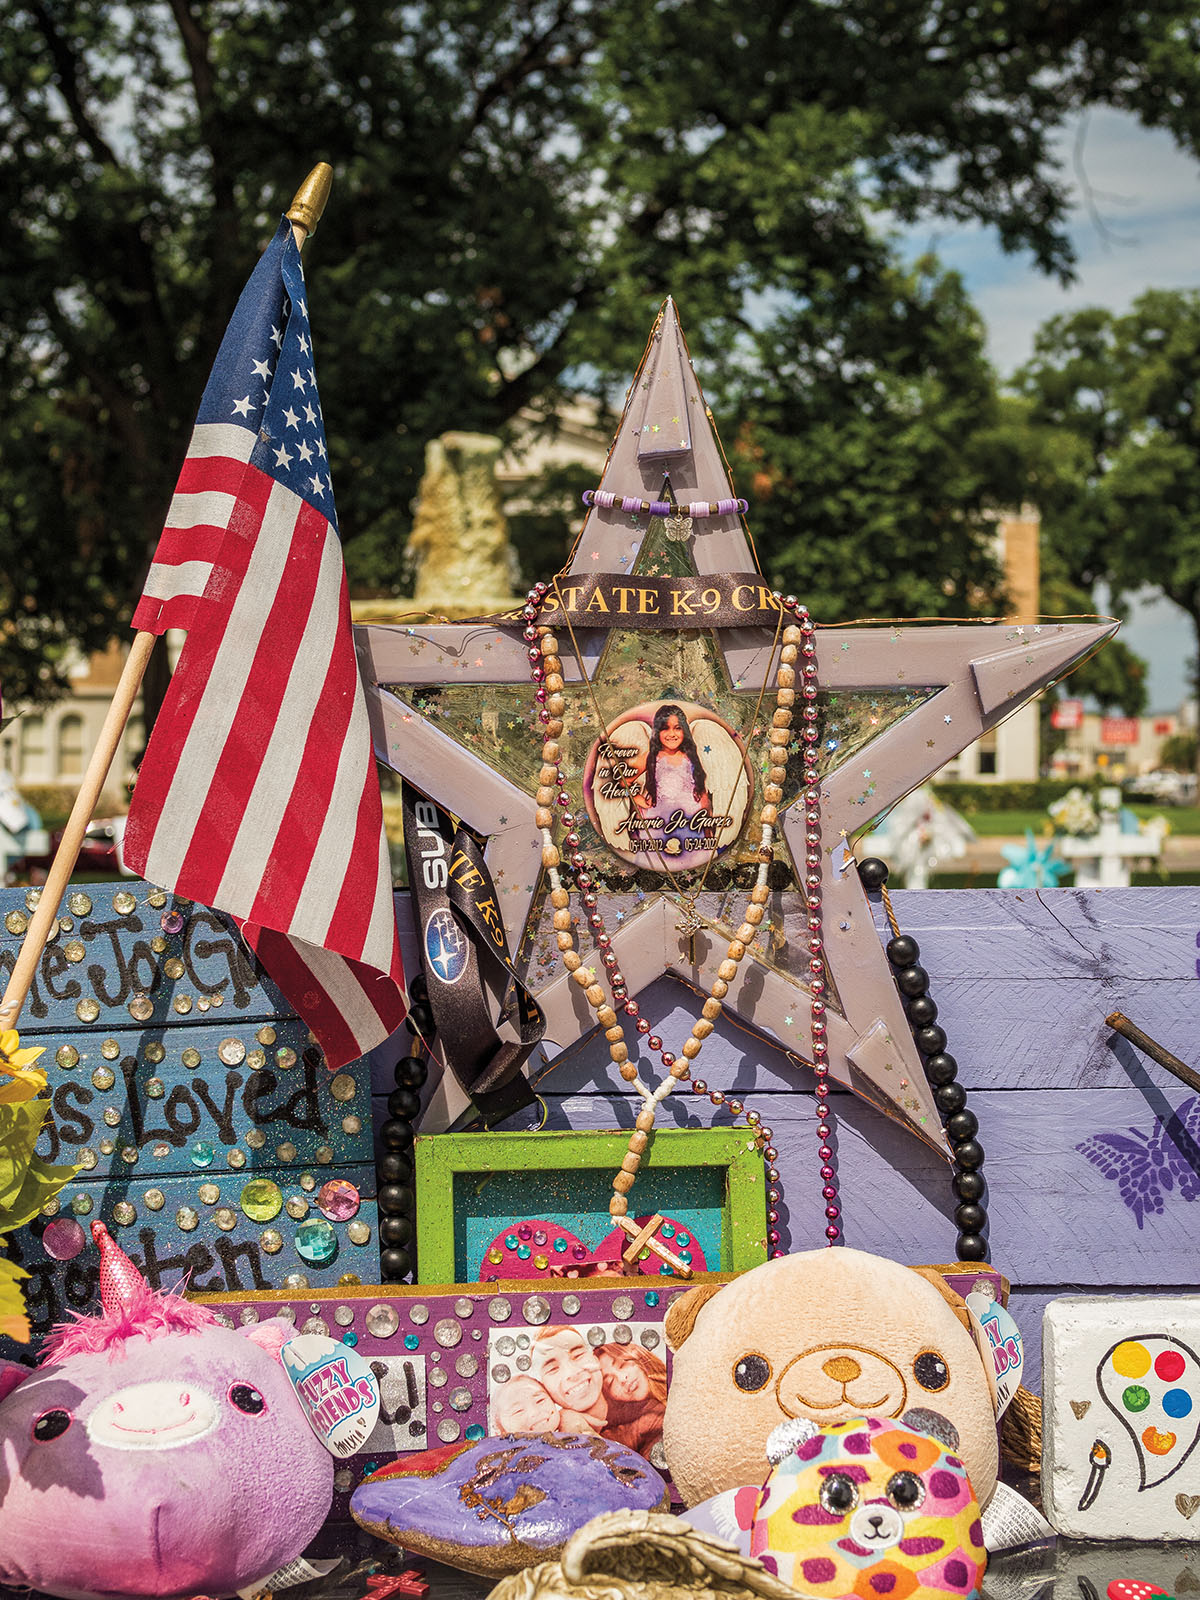 A closeup image of a shrine including an American flag, jewelry, a star, and photographs